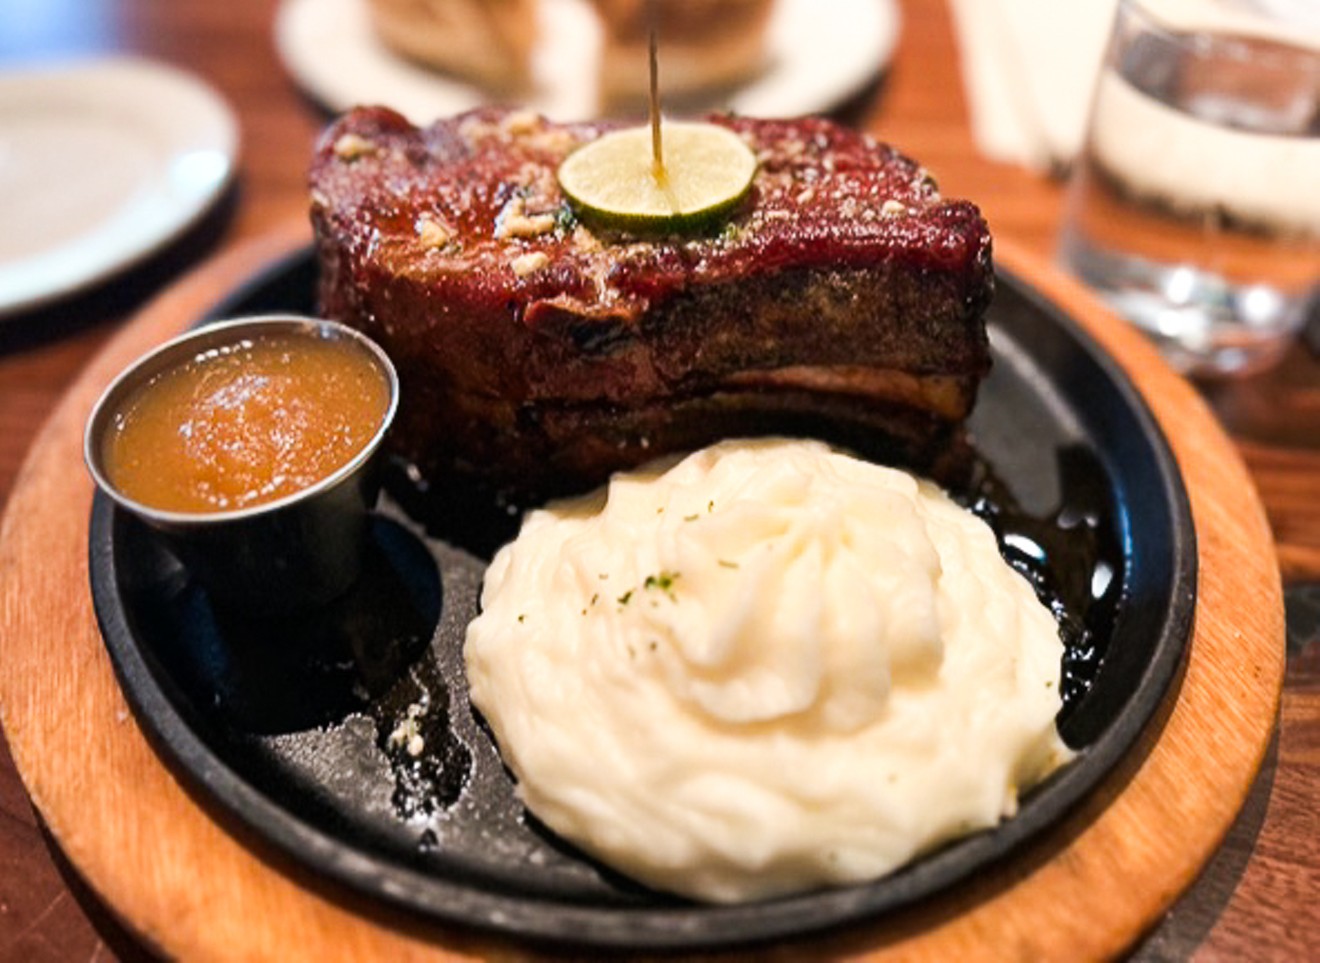 Pork Chop Friday At Perrys Steakhouse Might Be The Best Lunch In Dallas Dallas Observer